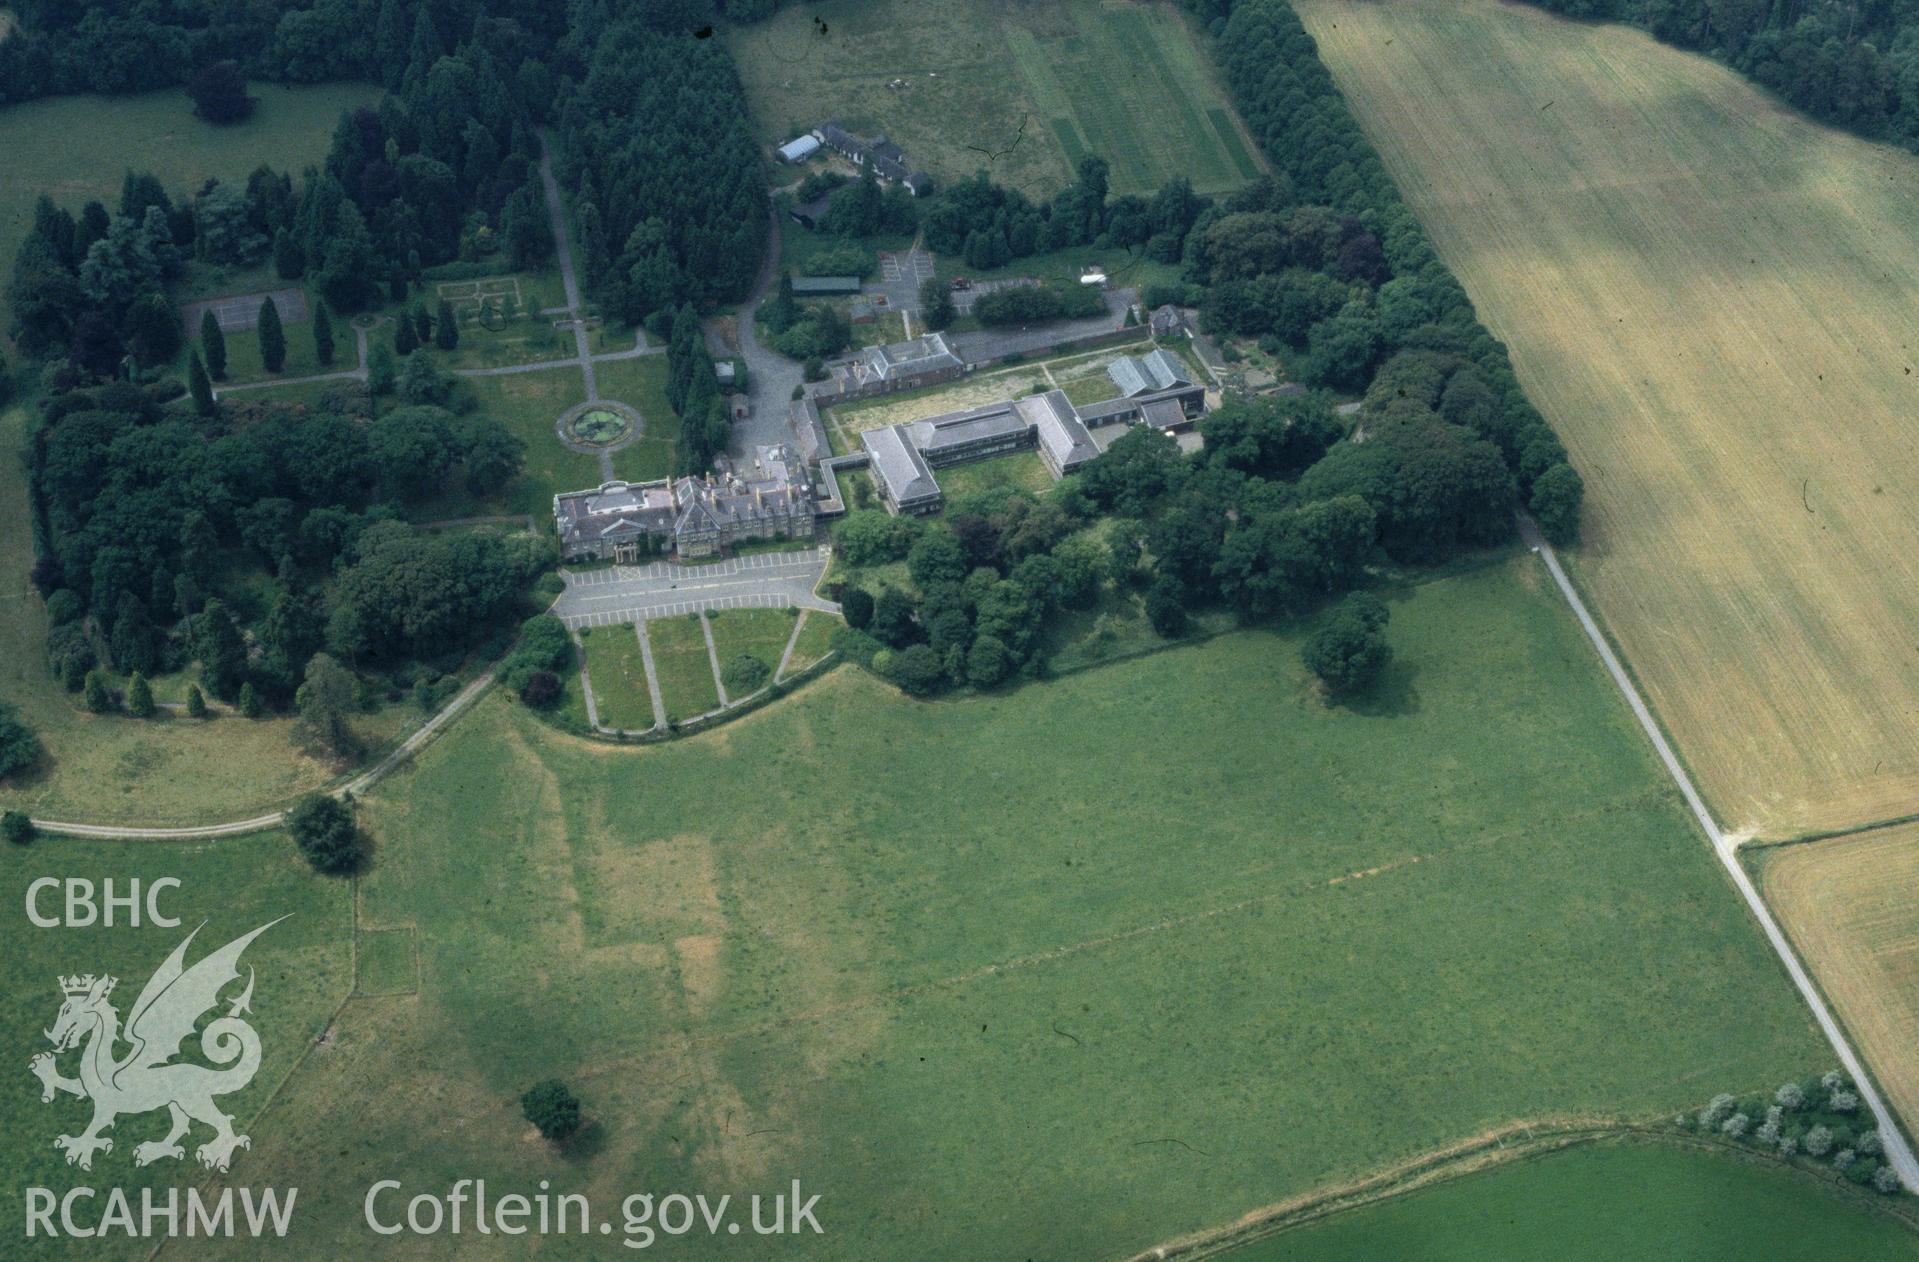 RCAHMW colour oblique aerial photograph of Trawsgoed Mansion taken on 02/07/1995 by C.R. Musson